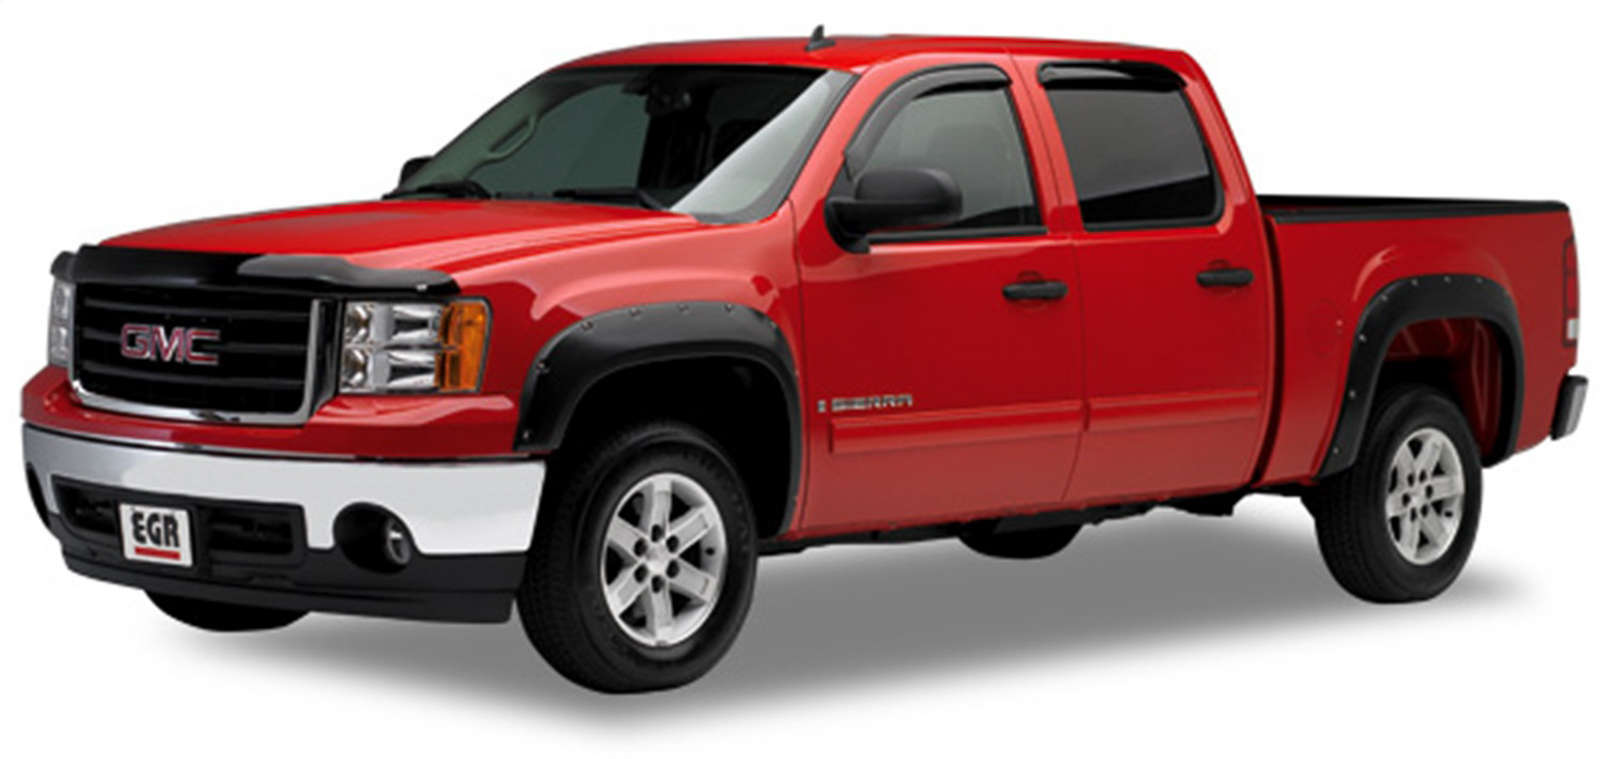 EGR 2007-2013 GMC Sierra 1500 Crew Cab Extended Cab Standard Cab Pickup 2 4 Door Short Box Only Set Of 4 Traditional Bolt-On Look Fender Flares 791414